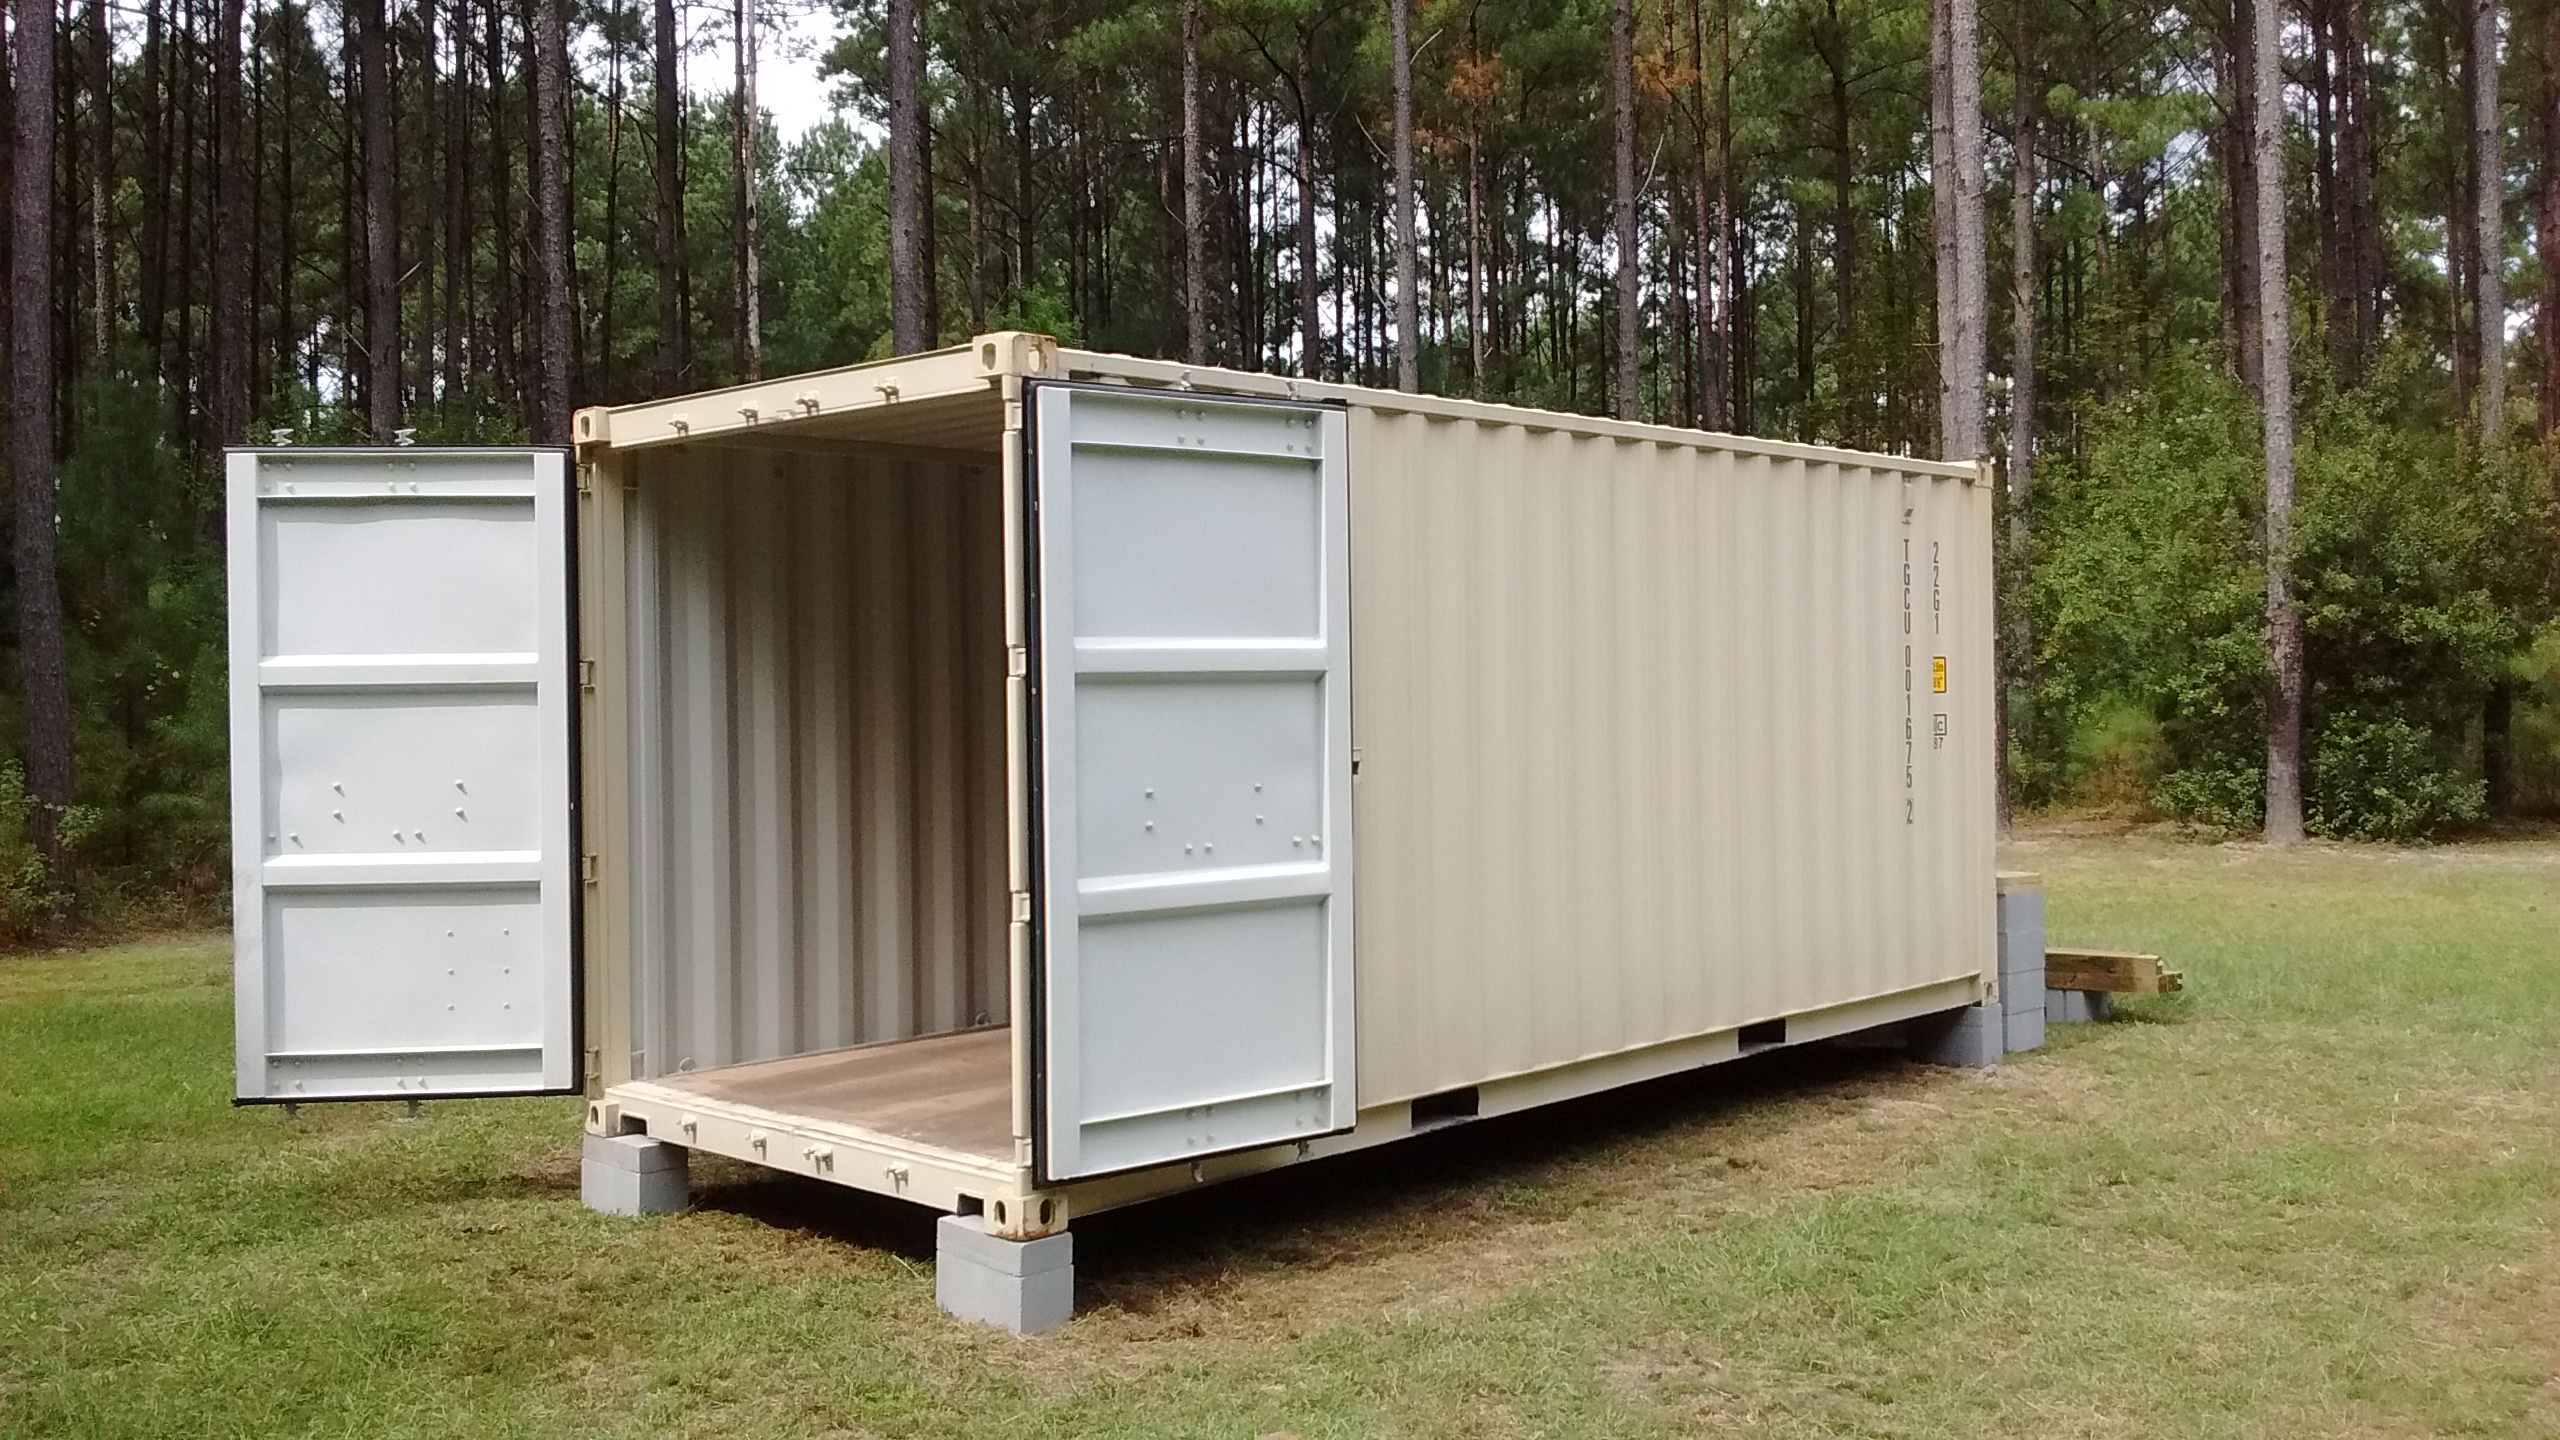 What is the benefit of using a 20ft shipping container as a tiny house?